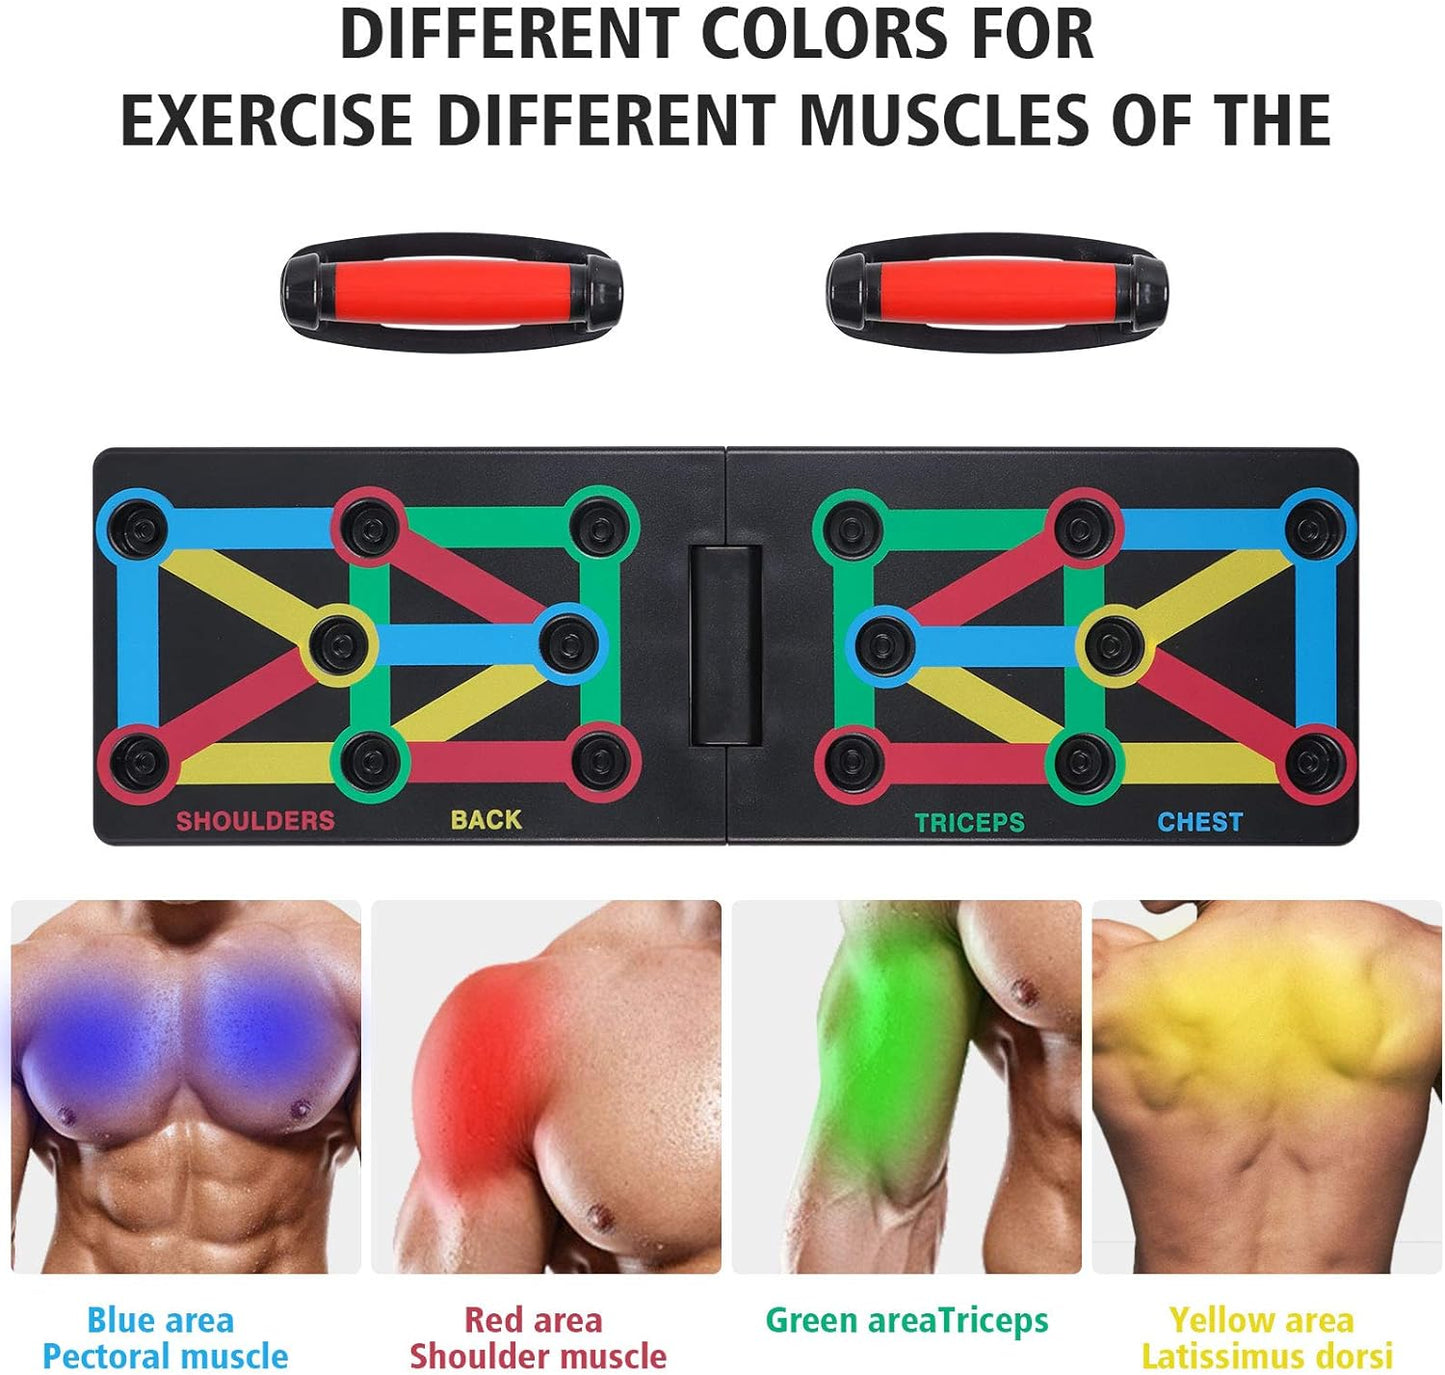 12 In1 Push up Board System,Foldable Portable Push-Up Rack Board,Multifunctional Color Coded Fitness Pushup Stands,For Indoor, Gymnasium, Outdoor Muscle Training Fitness Exercise